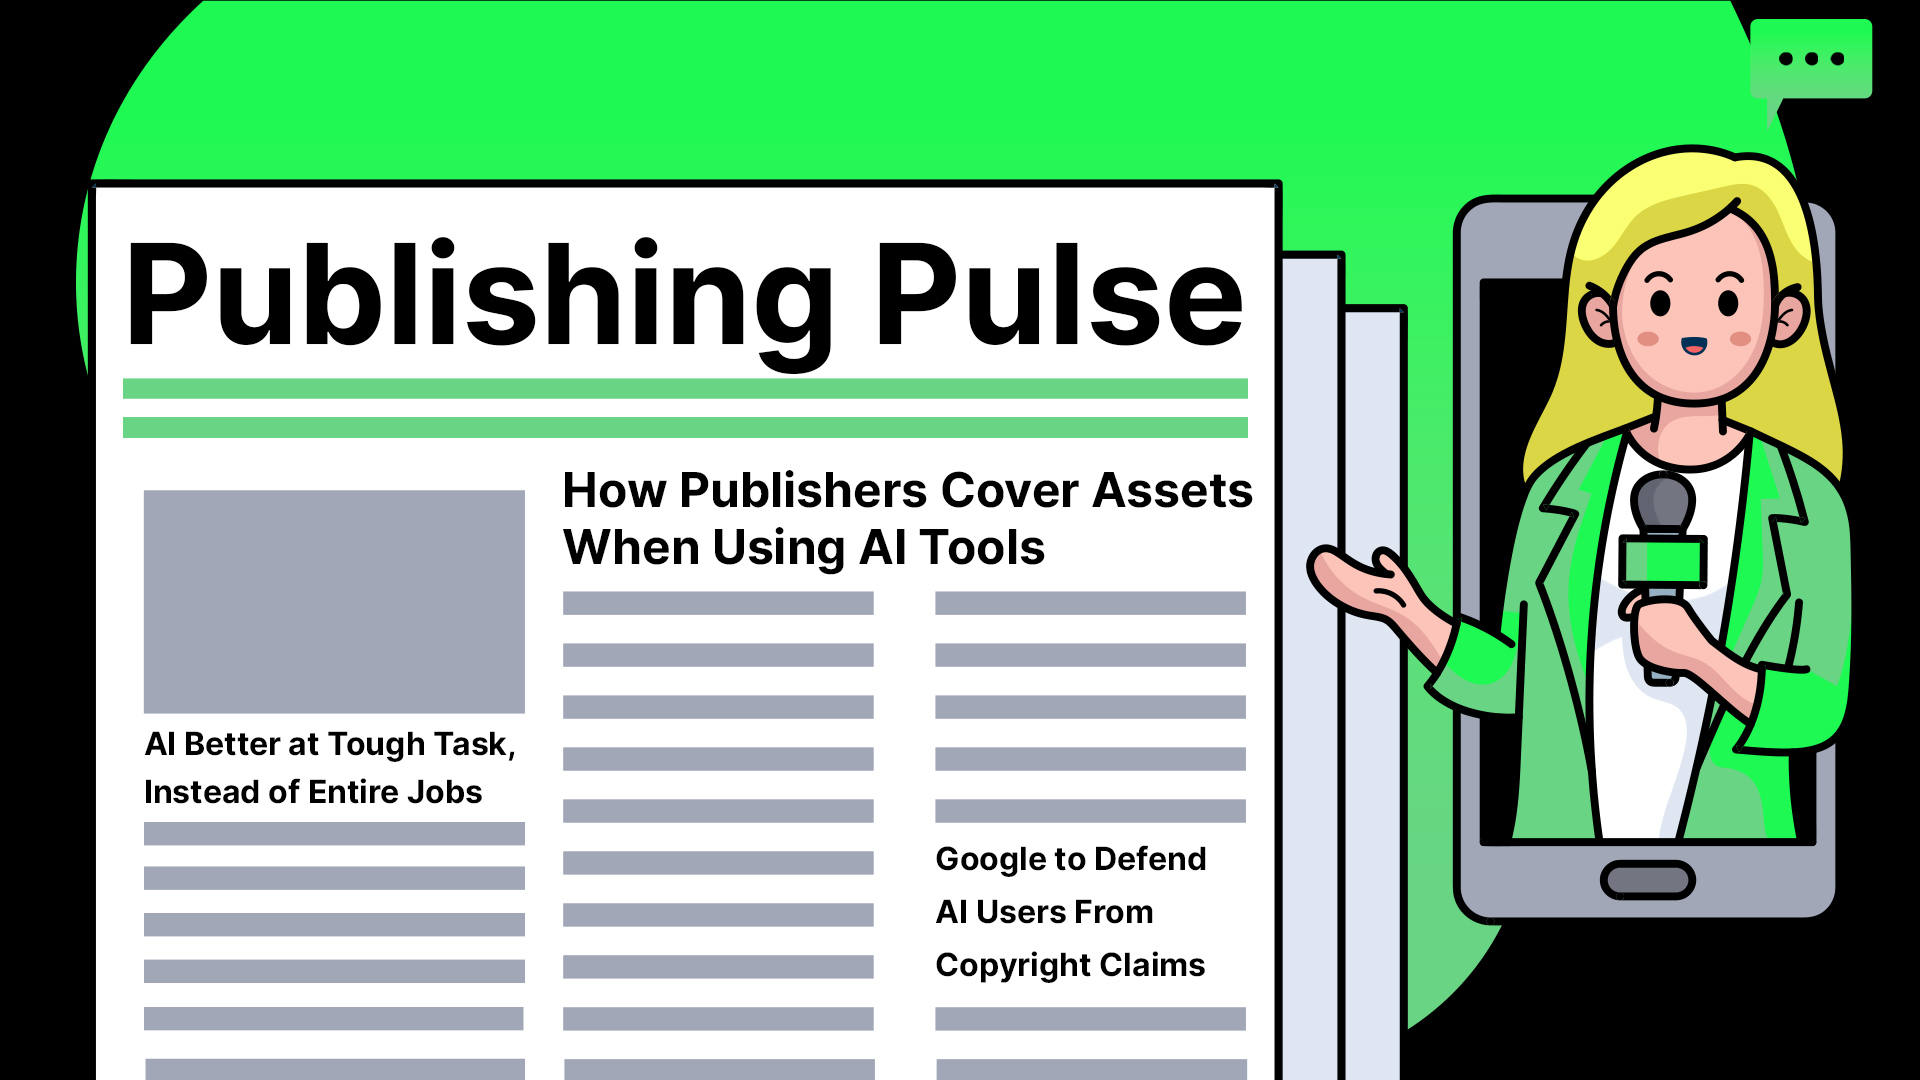 Publishing Pulse: Google&#8217;s HCU Effects on AI Content, Copyright Issues, and Blogging Evolution